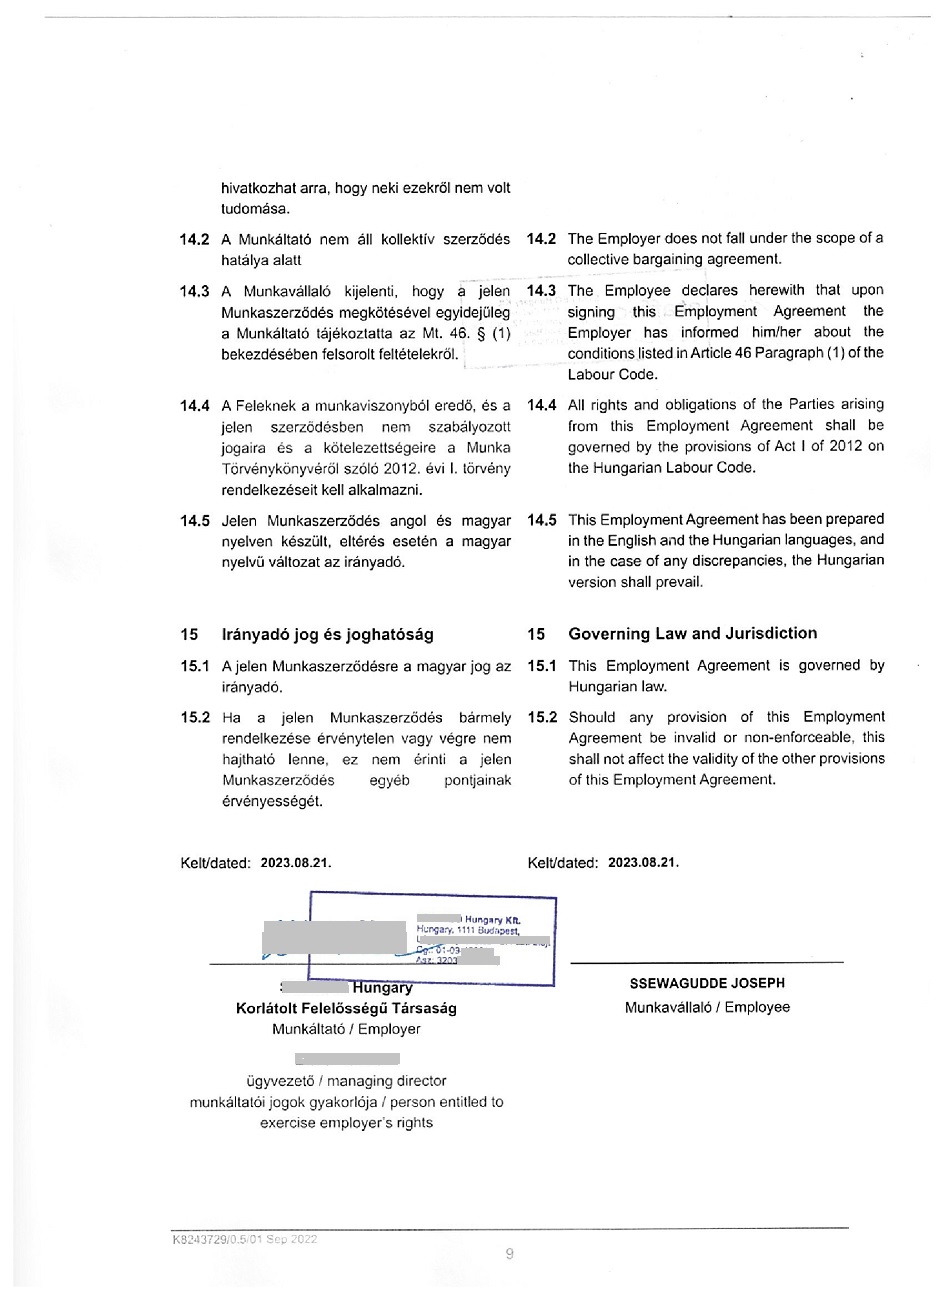 Empoyment agreement Hungary